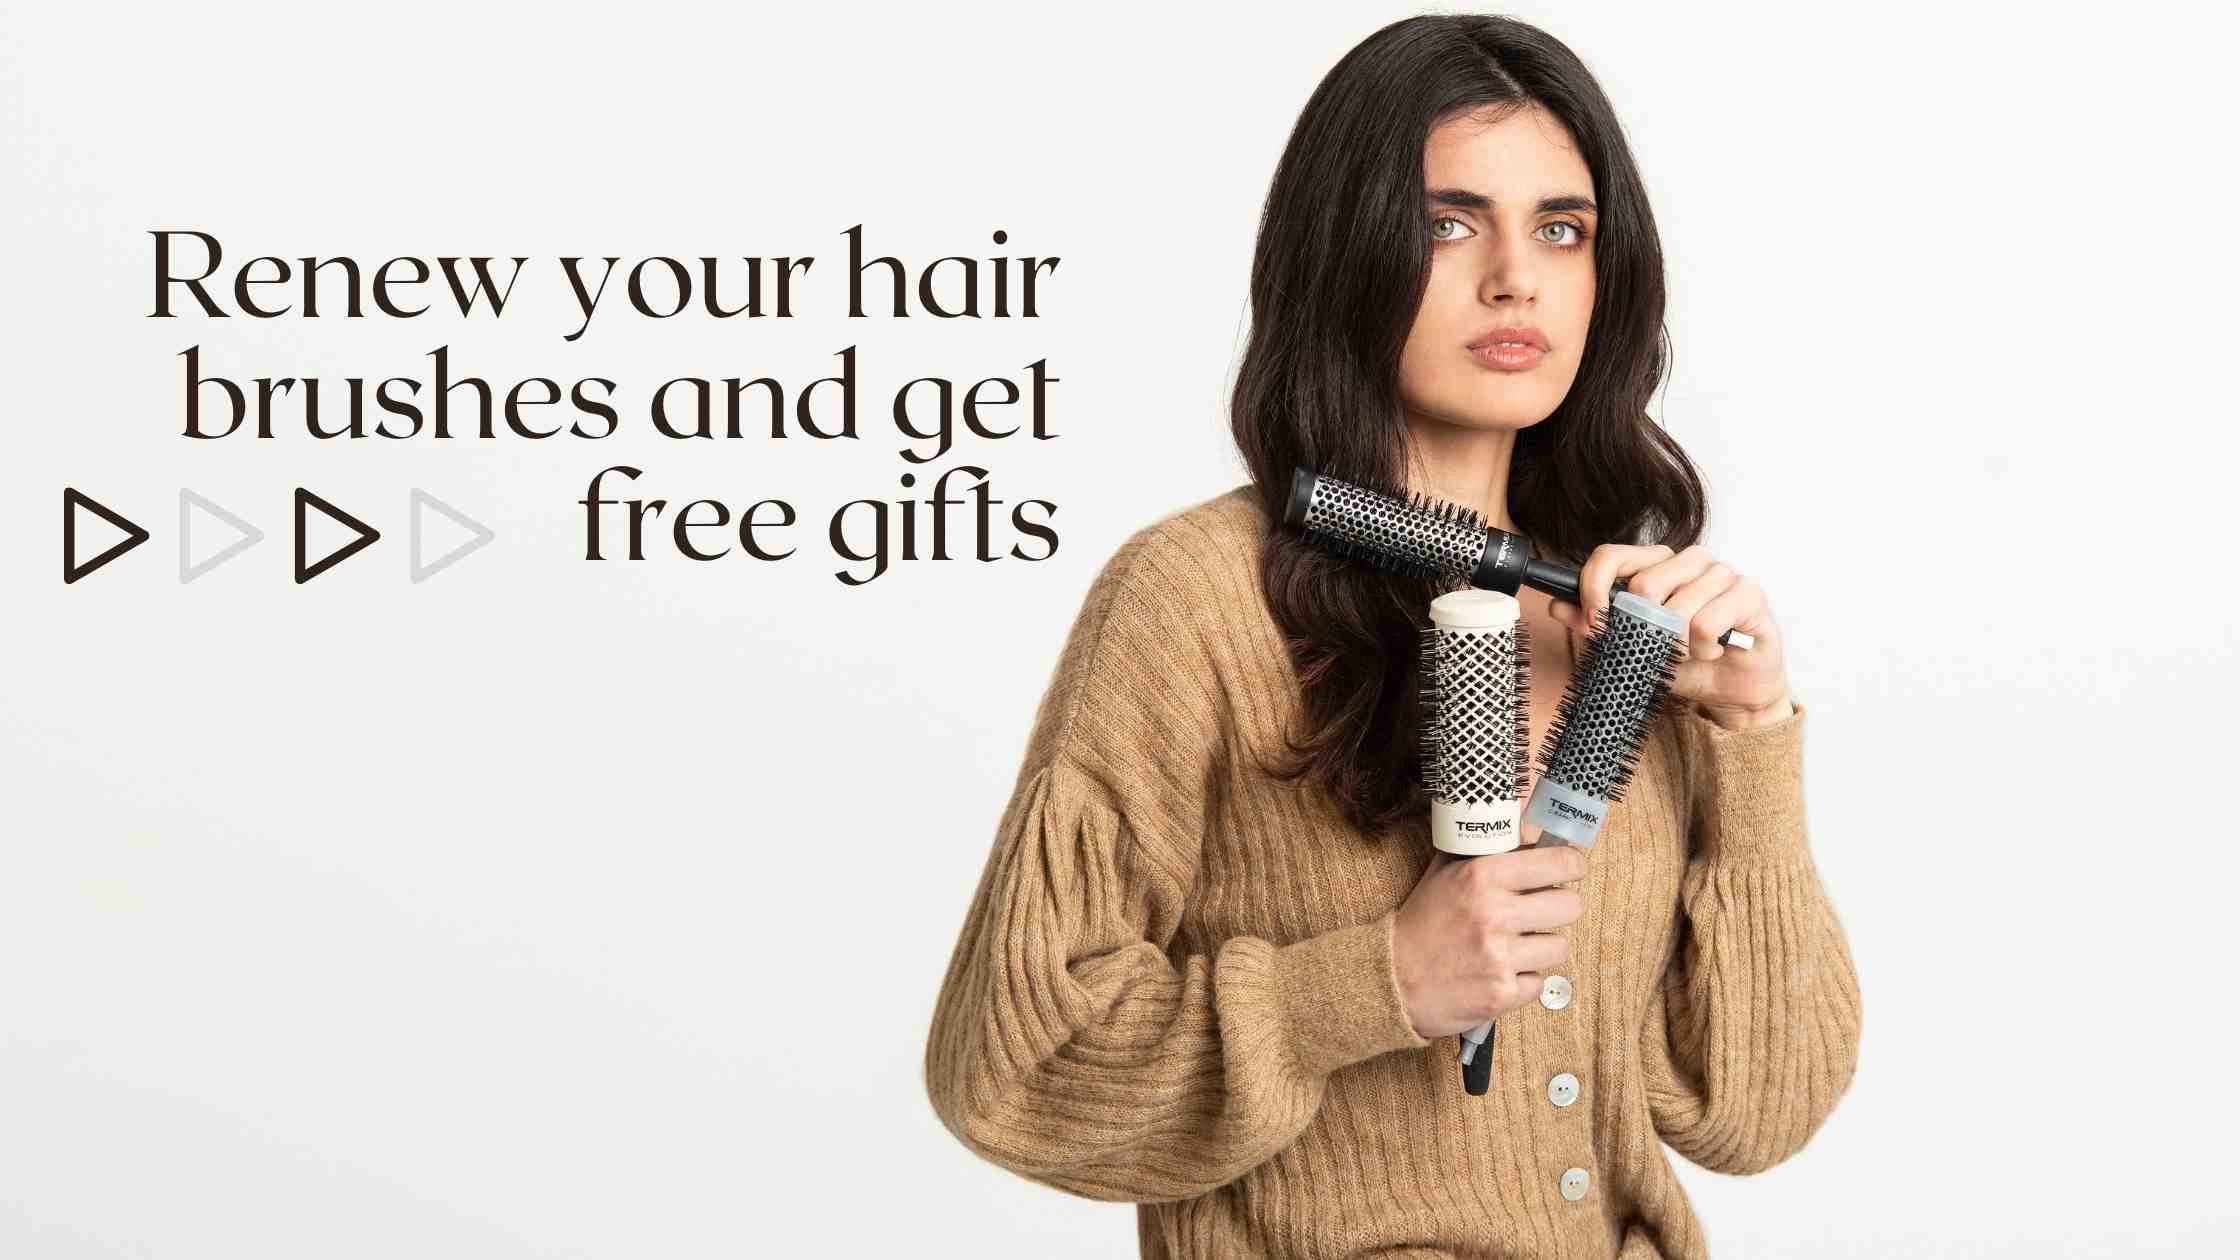  Renew your Termix hair brushes has a surprise